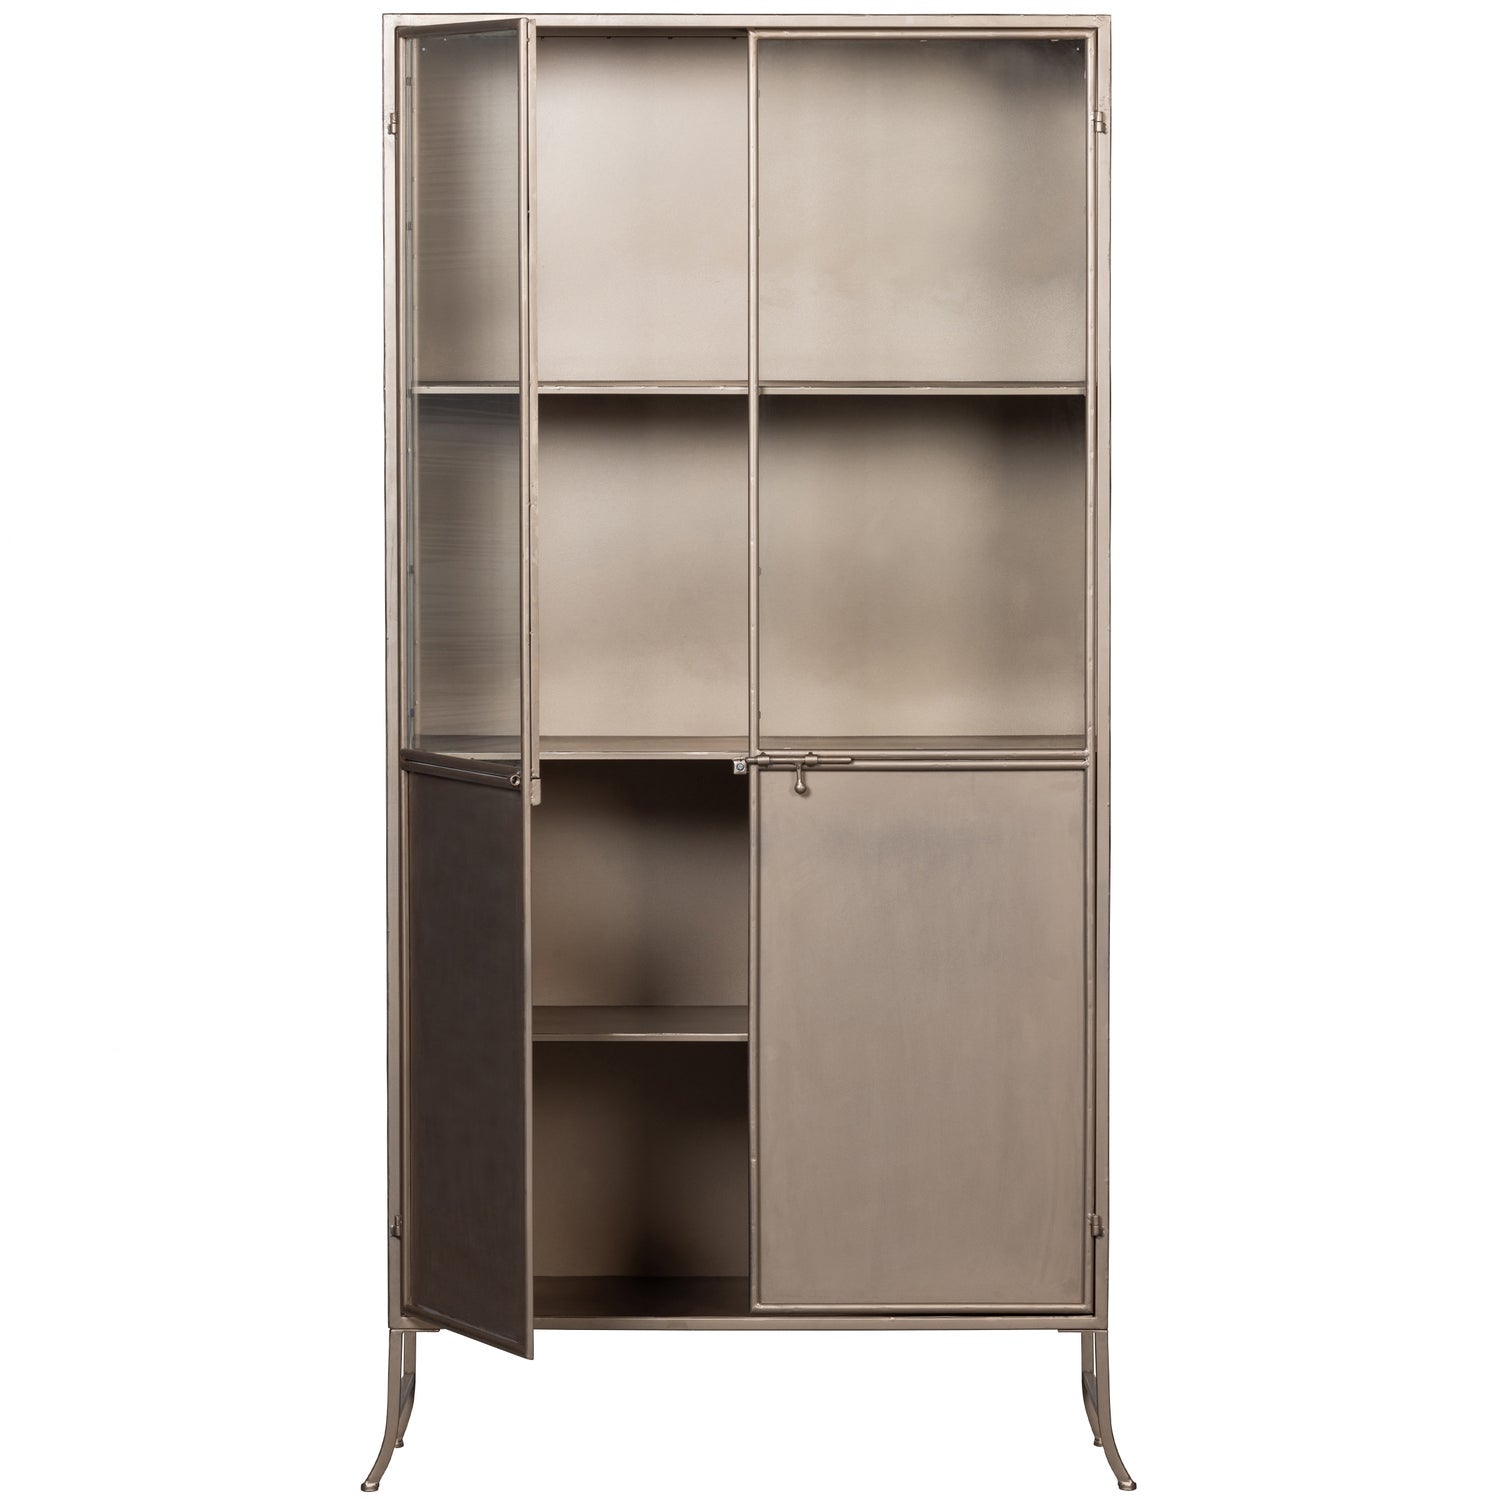 FOSSIL GLASS-DOOR CABINET METAL CHAMPAGNE